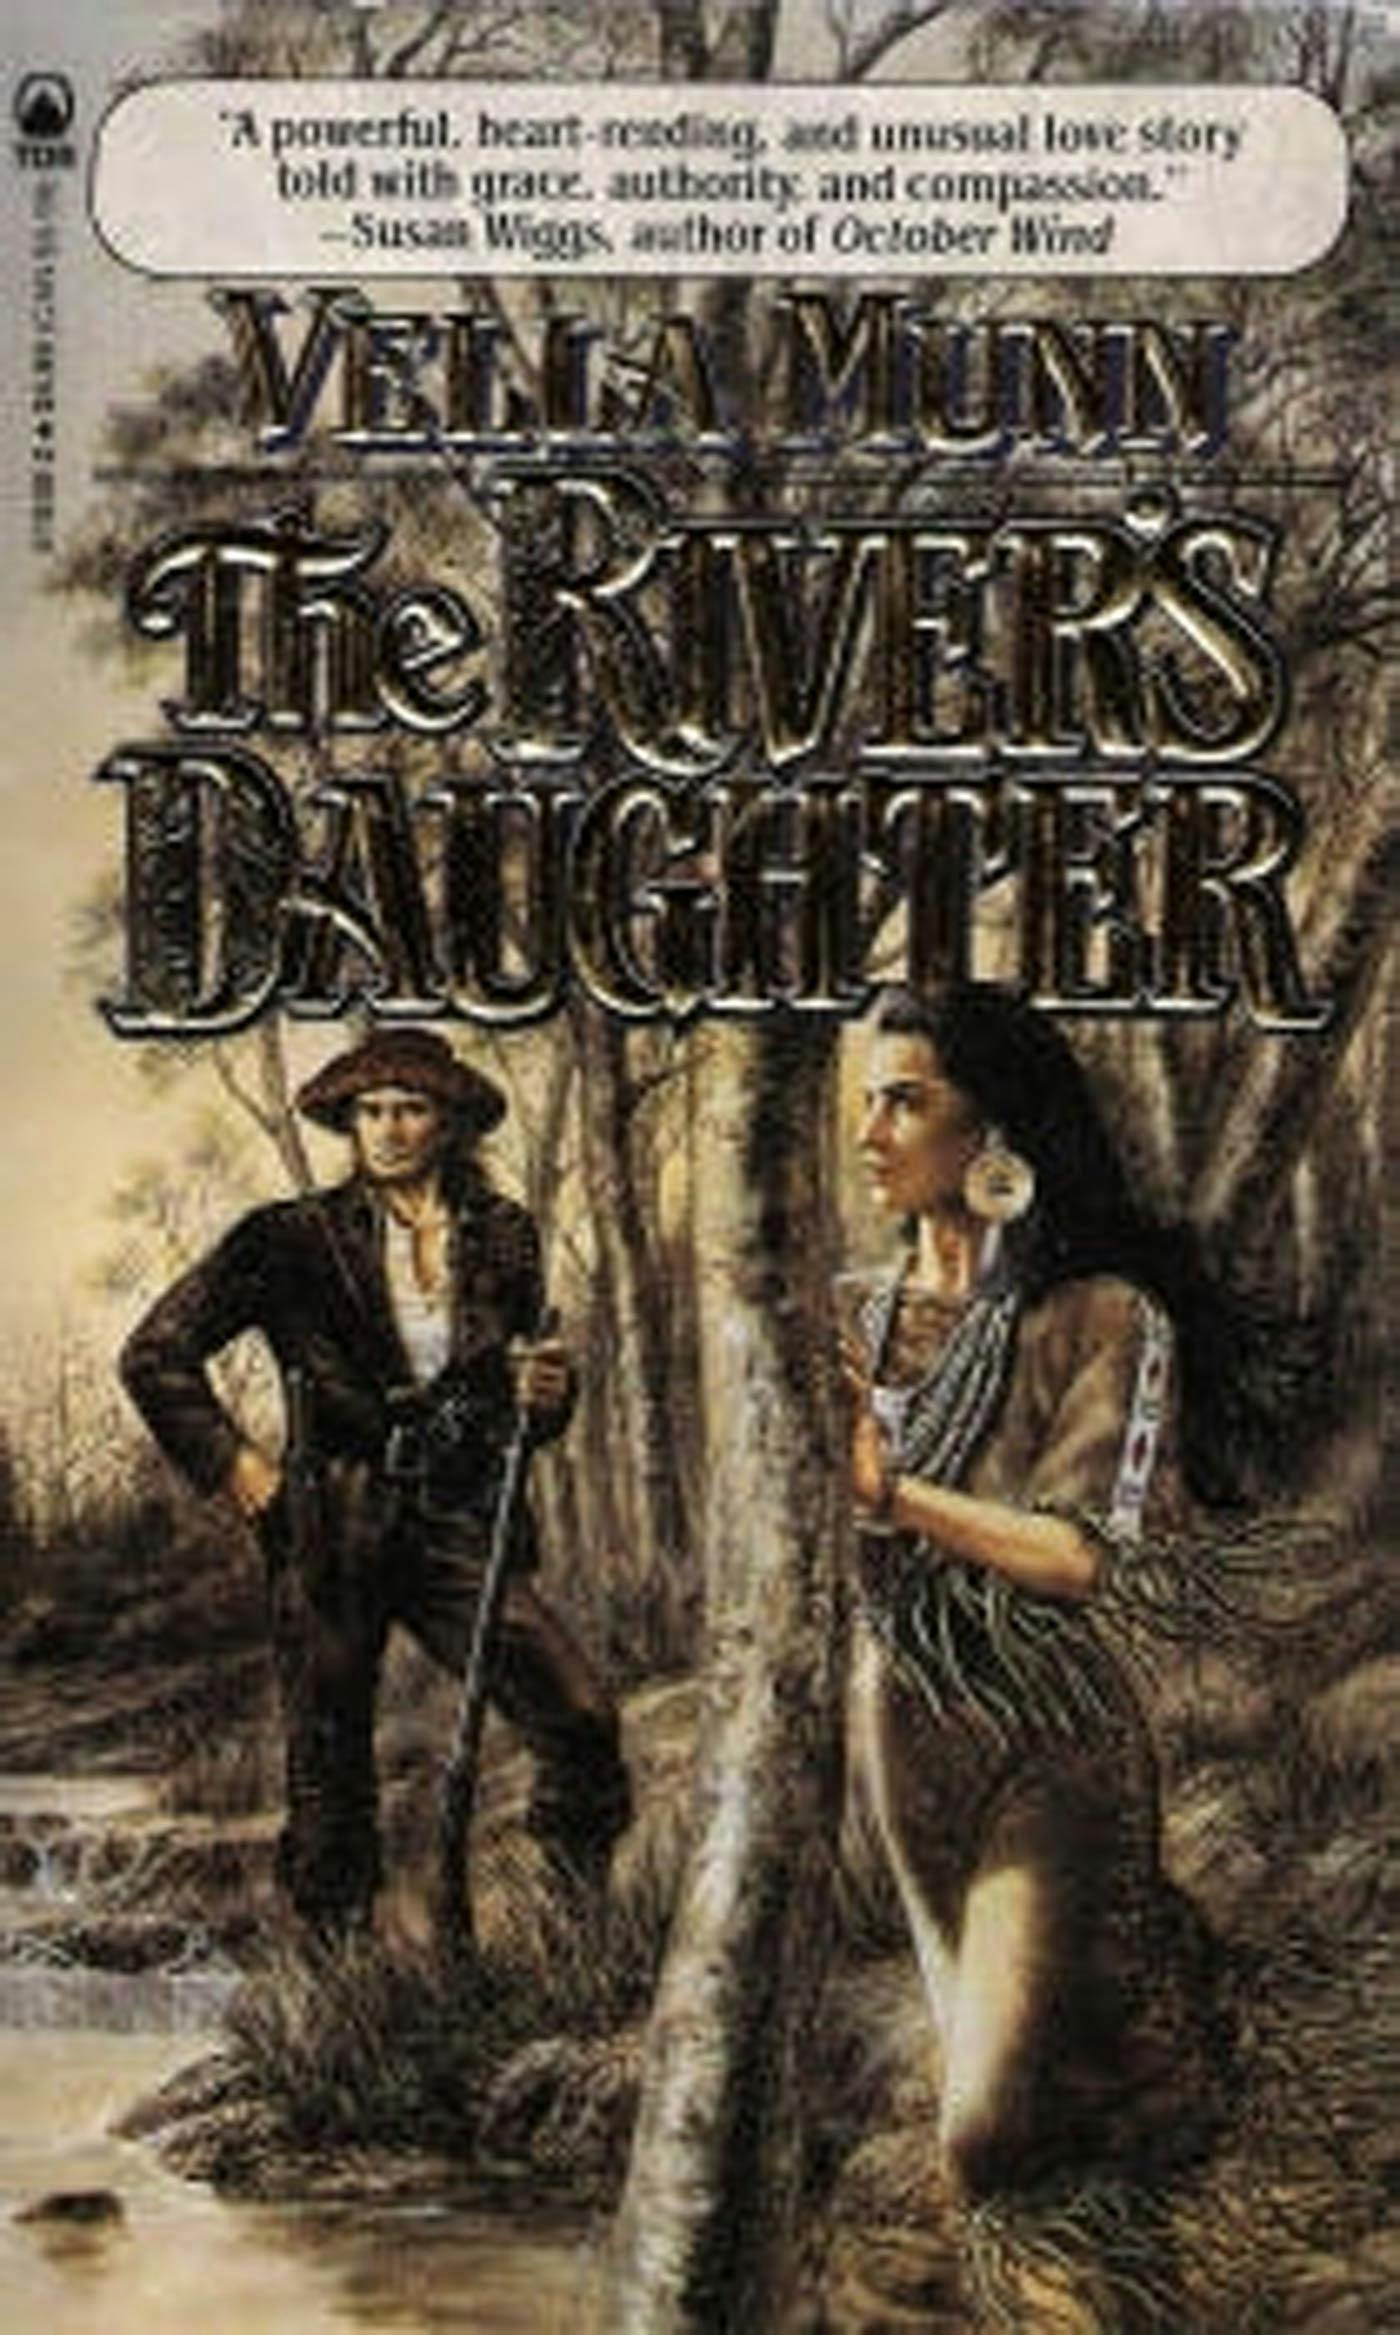 Cover for the book titled as: The River's Daughter